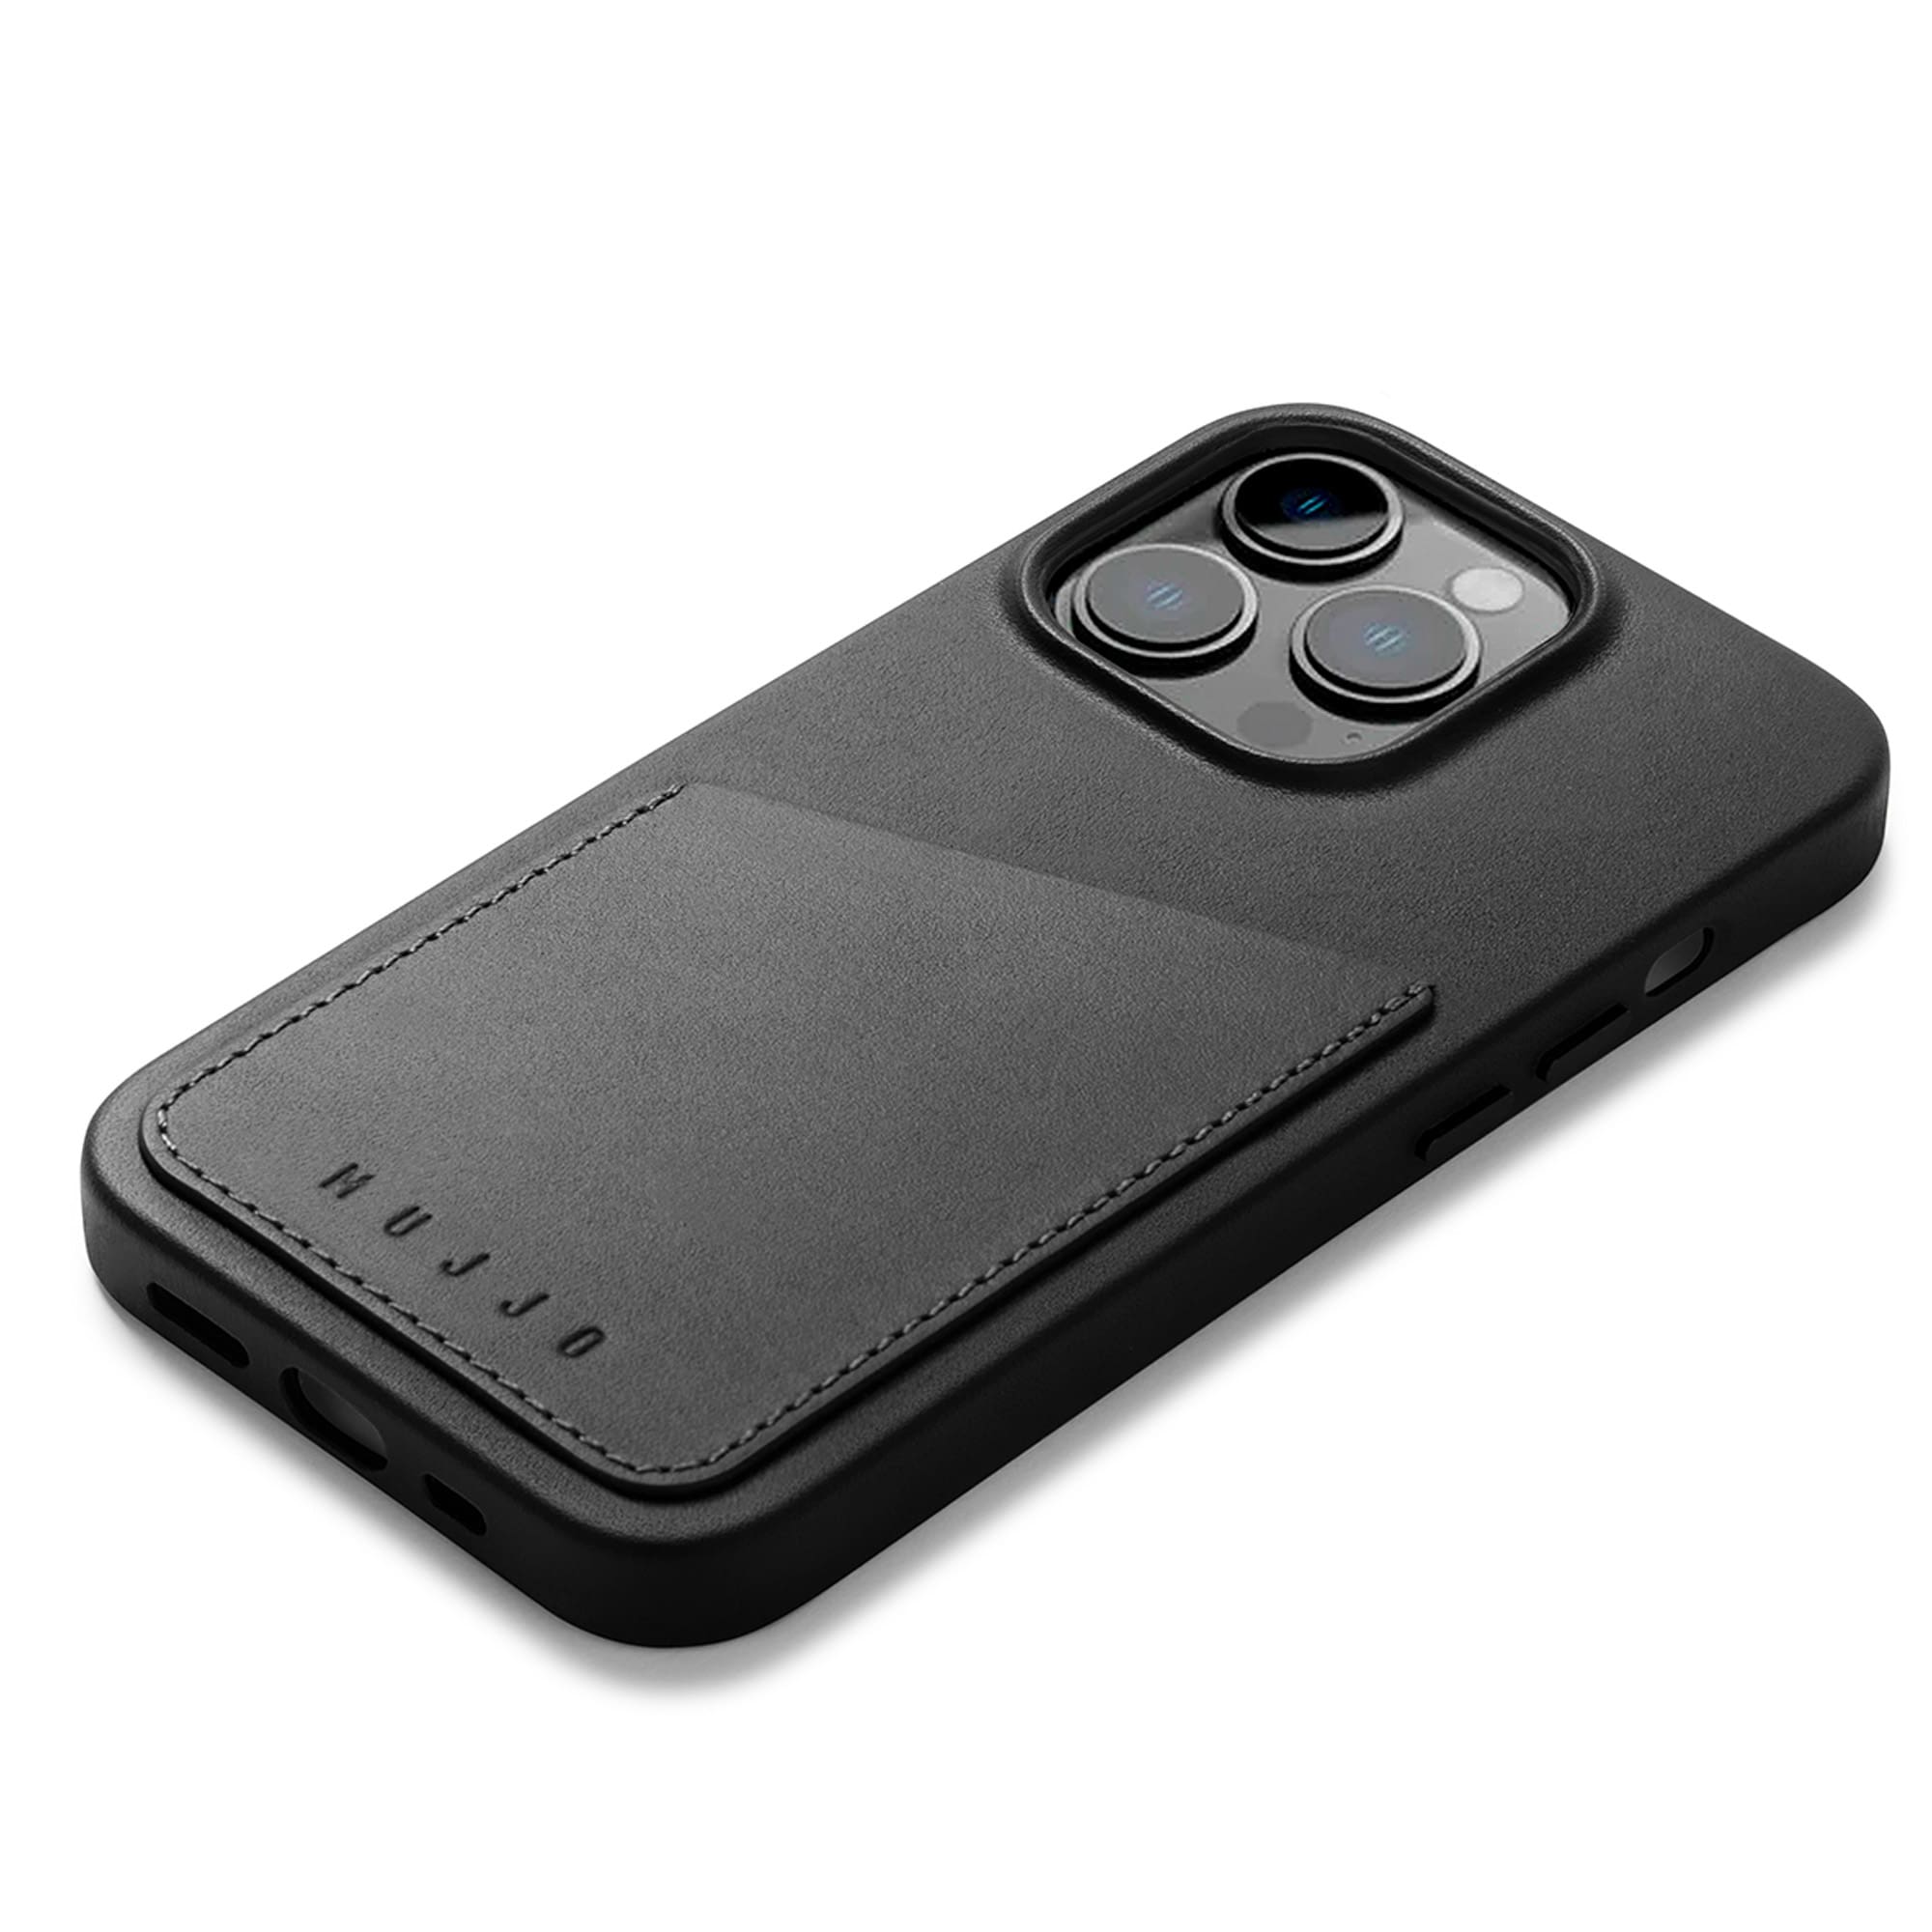 Tumi Black Magnet Wallet Case for Apple iPhone 14 Pro